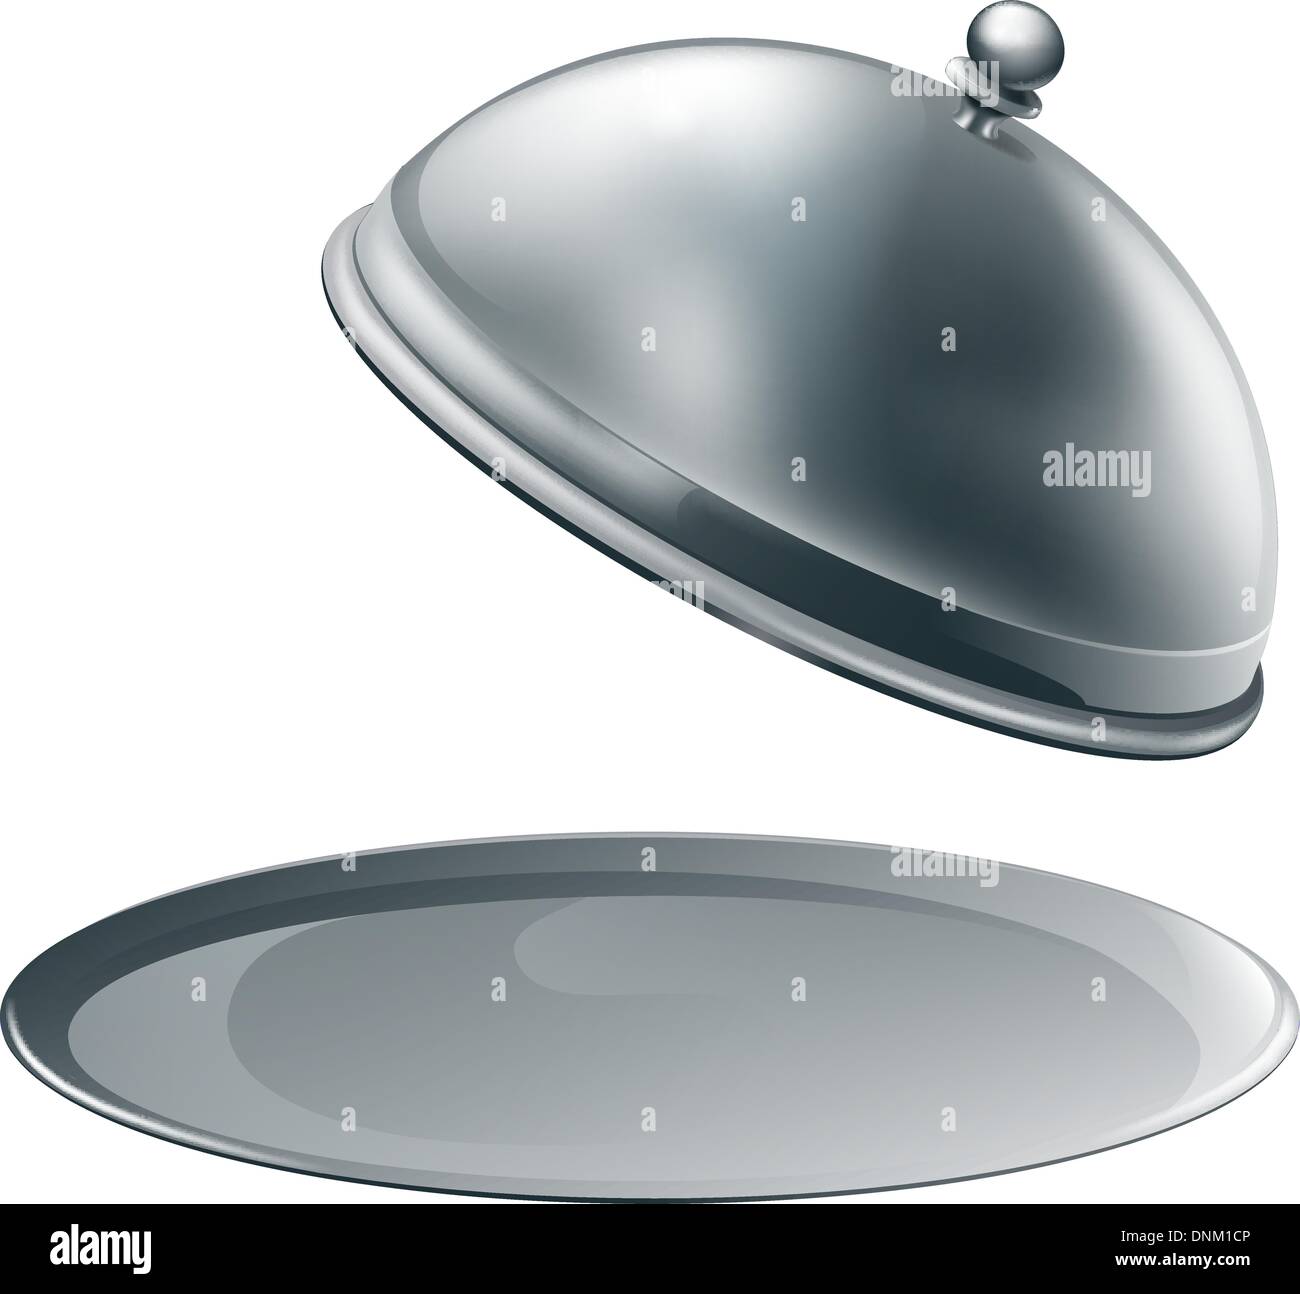 An open empty metal silver platter or cloche with space to place object or text on it Stock Vector